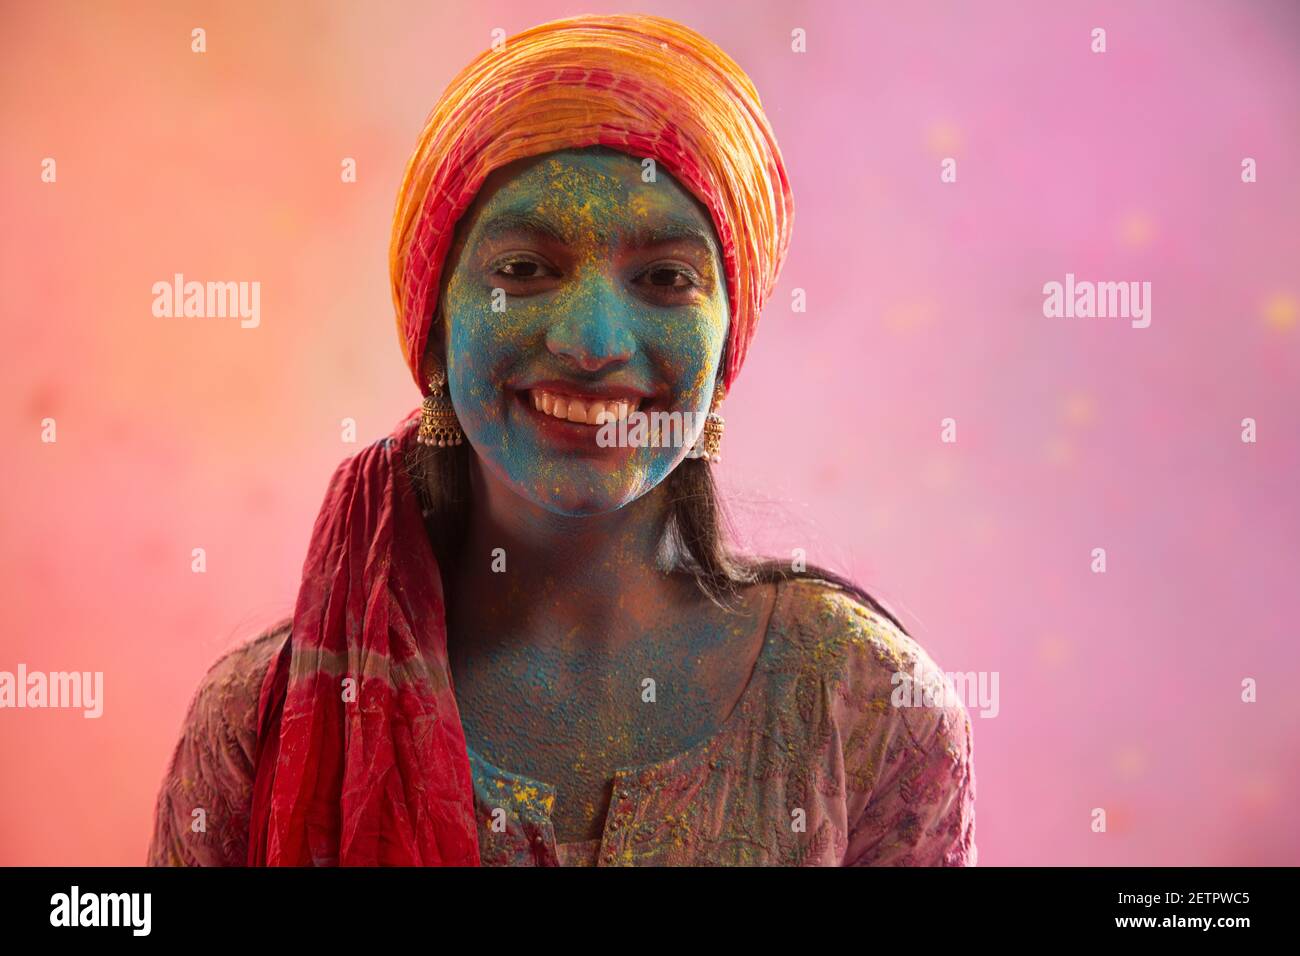 PORTRAIT OF A SMILING YOUNG WOMAN WITH GULAL ALL OVER WEARING PAGDI Stock Photo